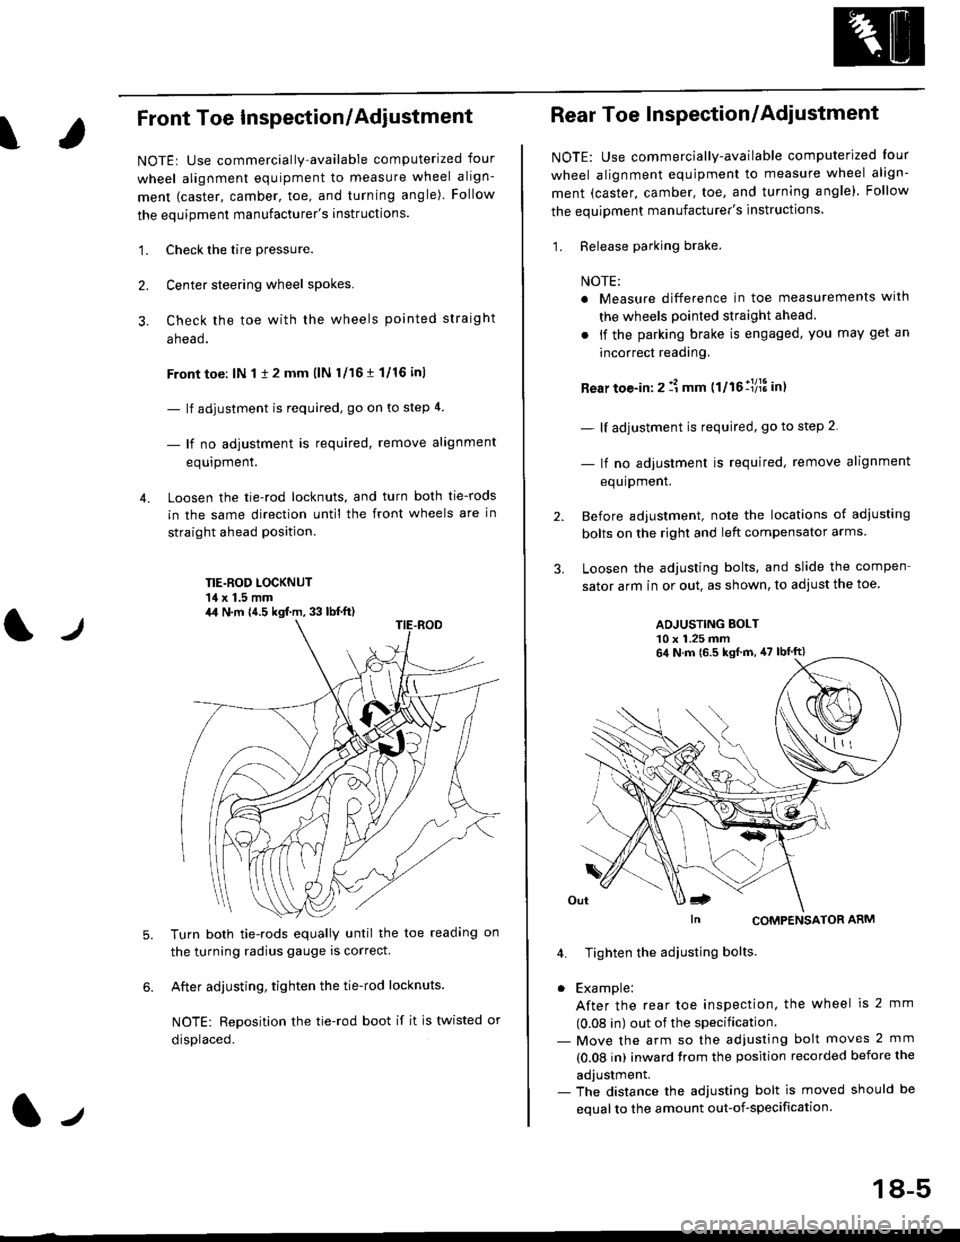 HONDA CIVIC 2000 6.G Workshop Manual ?
Front Toe Inspection/Adiustment
NOTE: Use commercially-available computerized four
wheel alignment equipment to measure wheel align-
ment (caster, camber, toe, and turning angle). Follow
the equipme